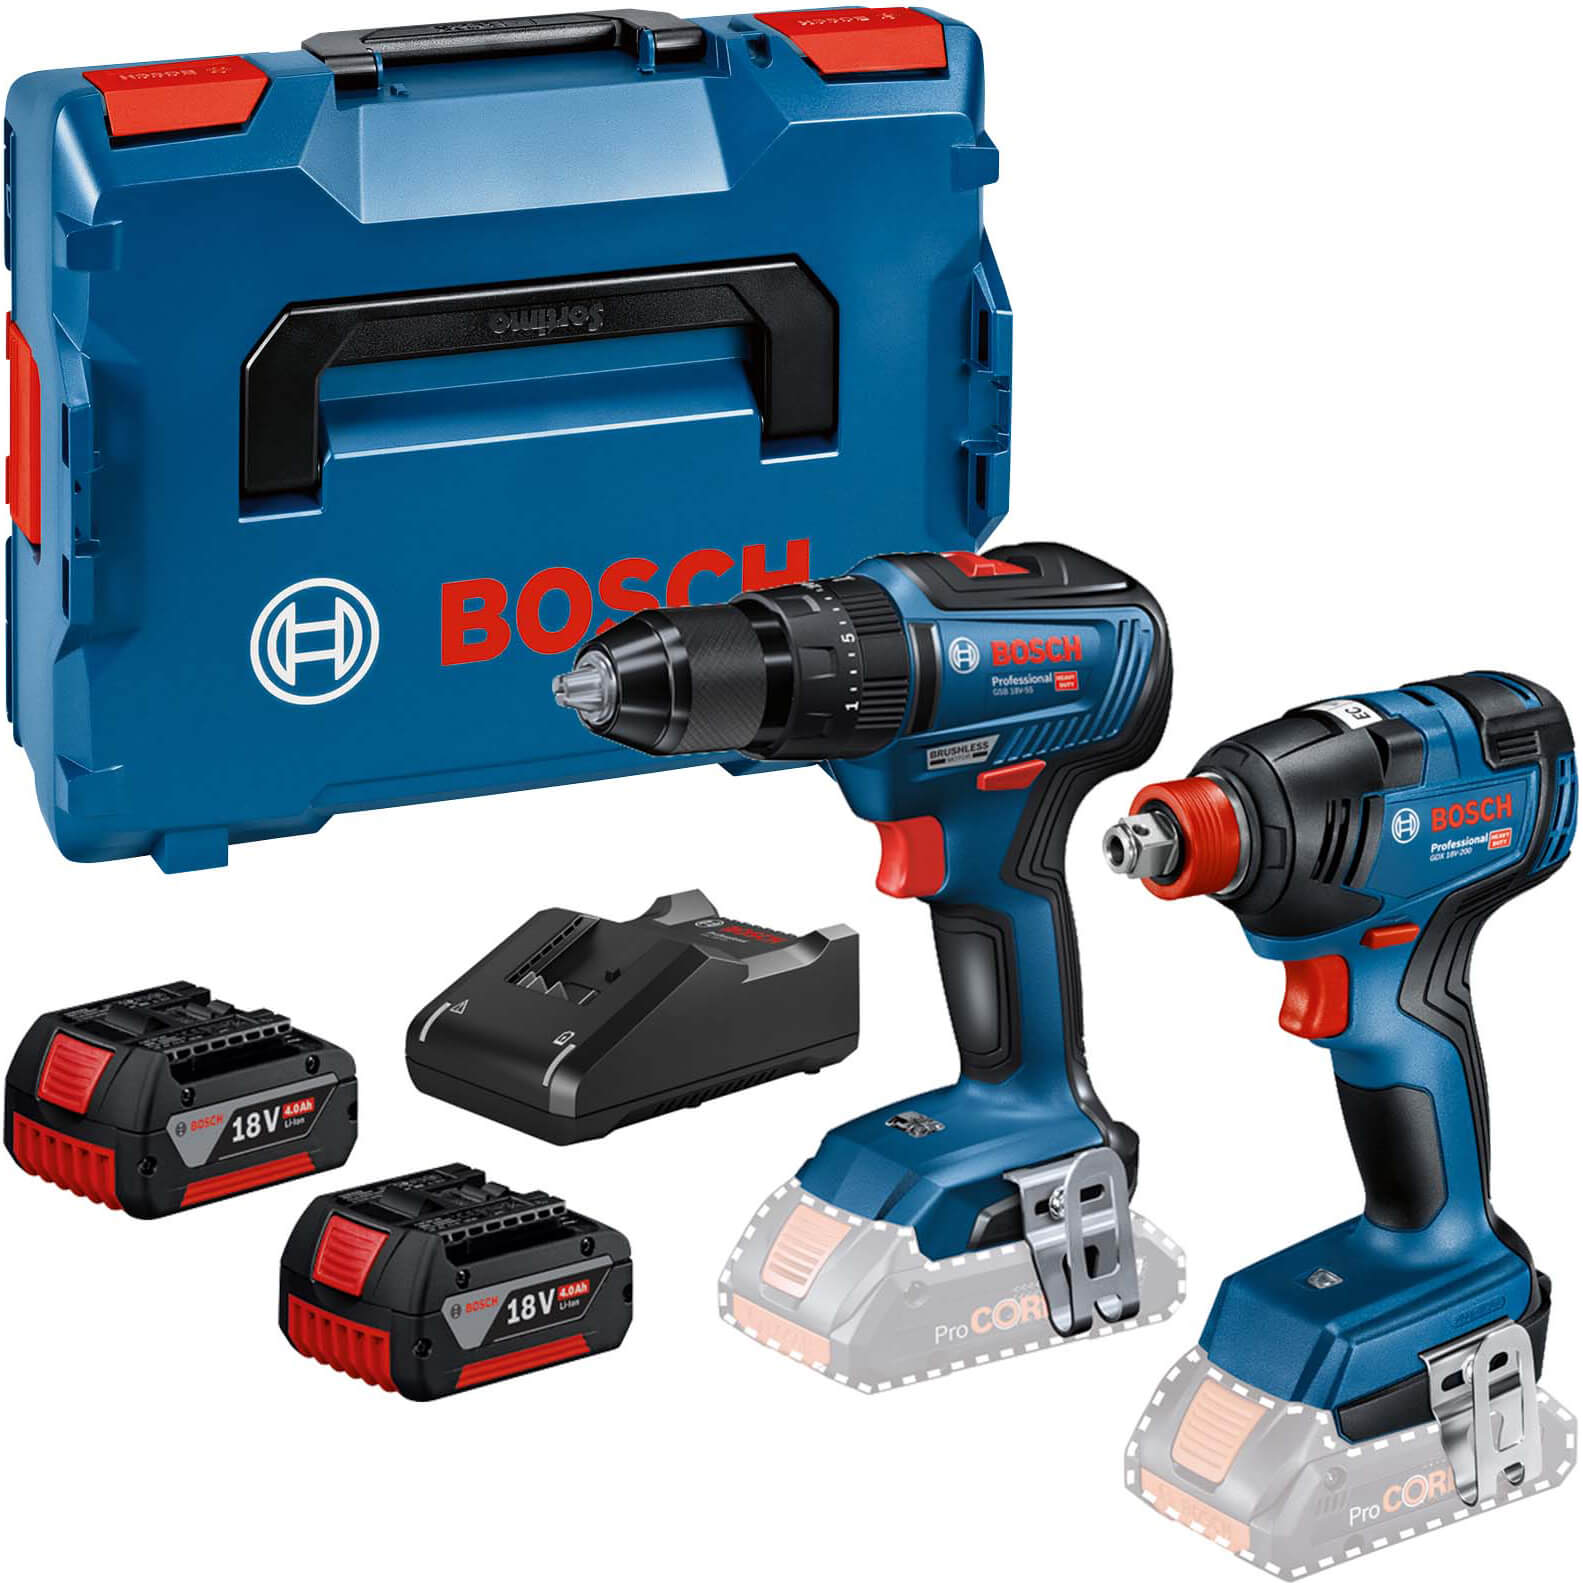 Bosch 18v Cordless Brushless Combi Drill and Impact Driver Kit 2 x 4ah Li-ion Charger Case